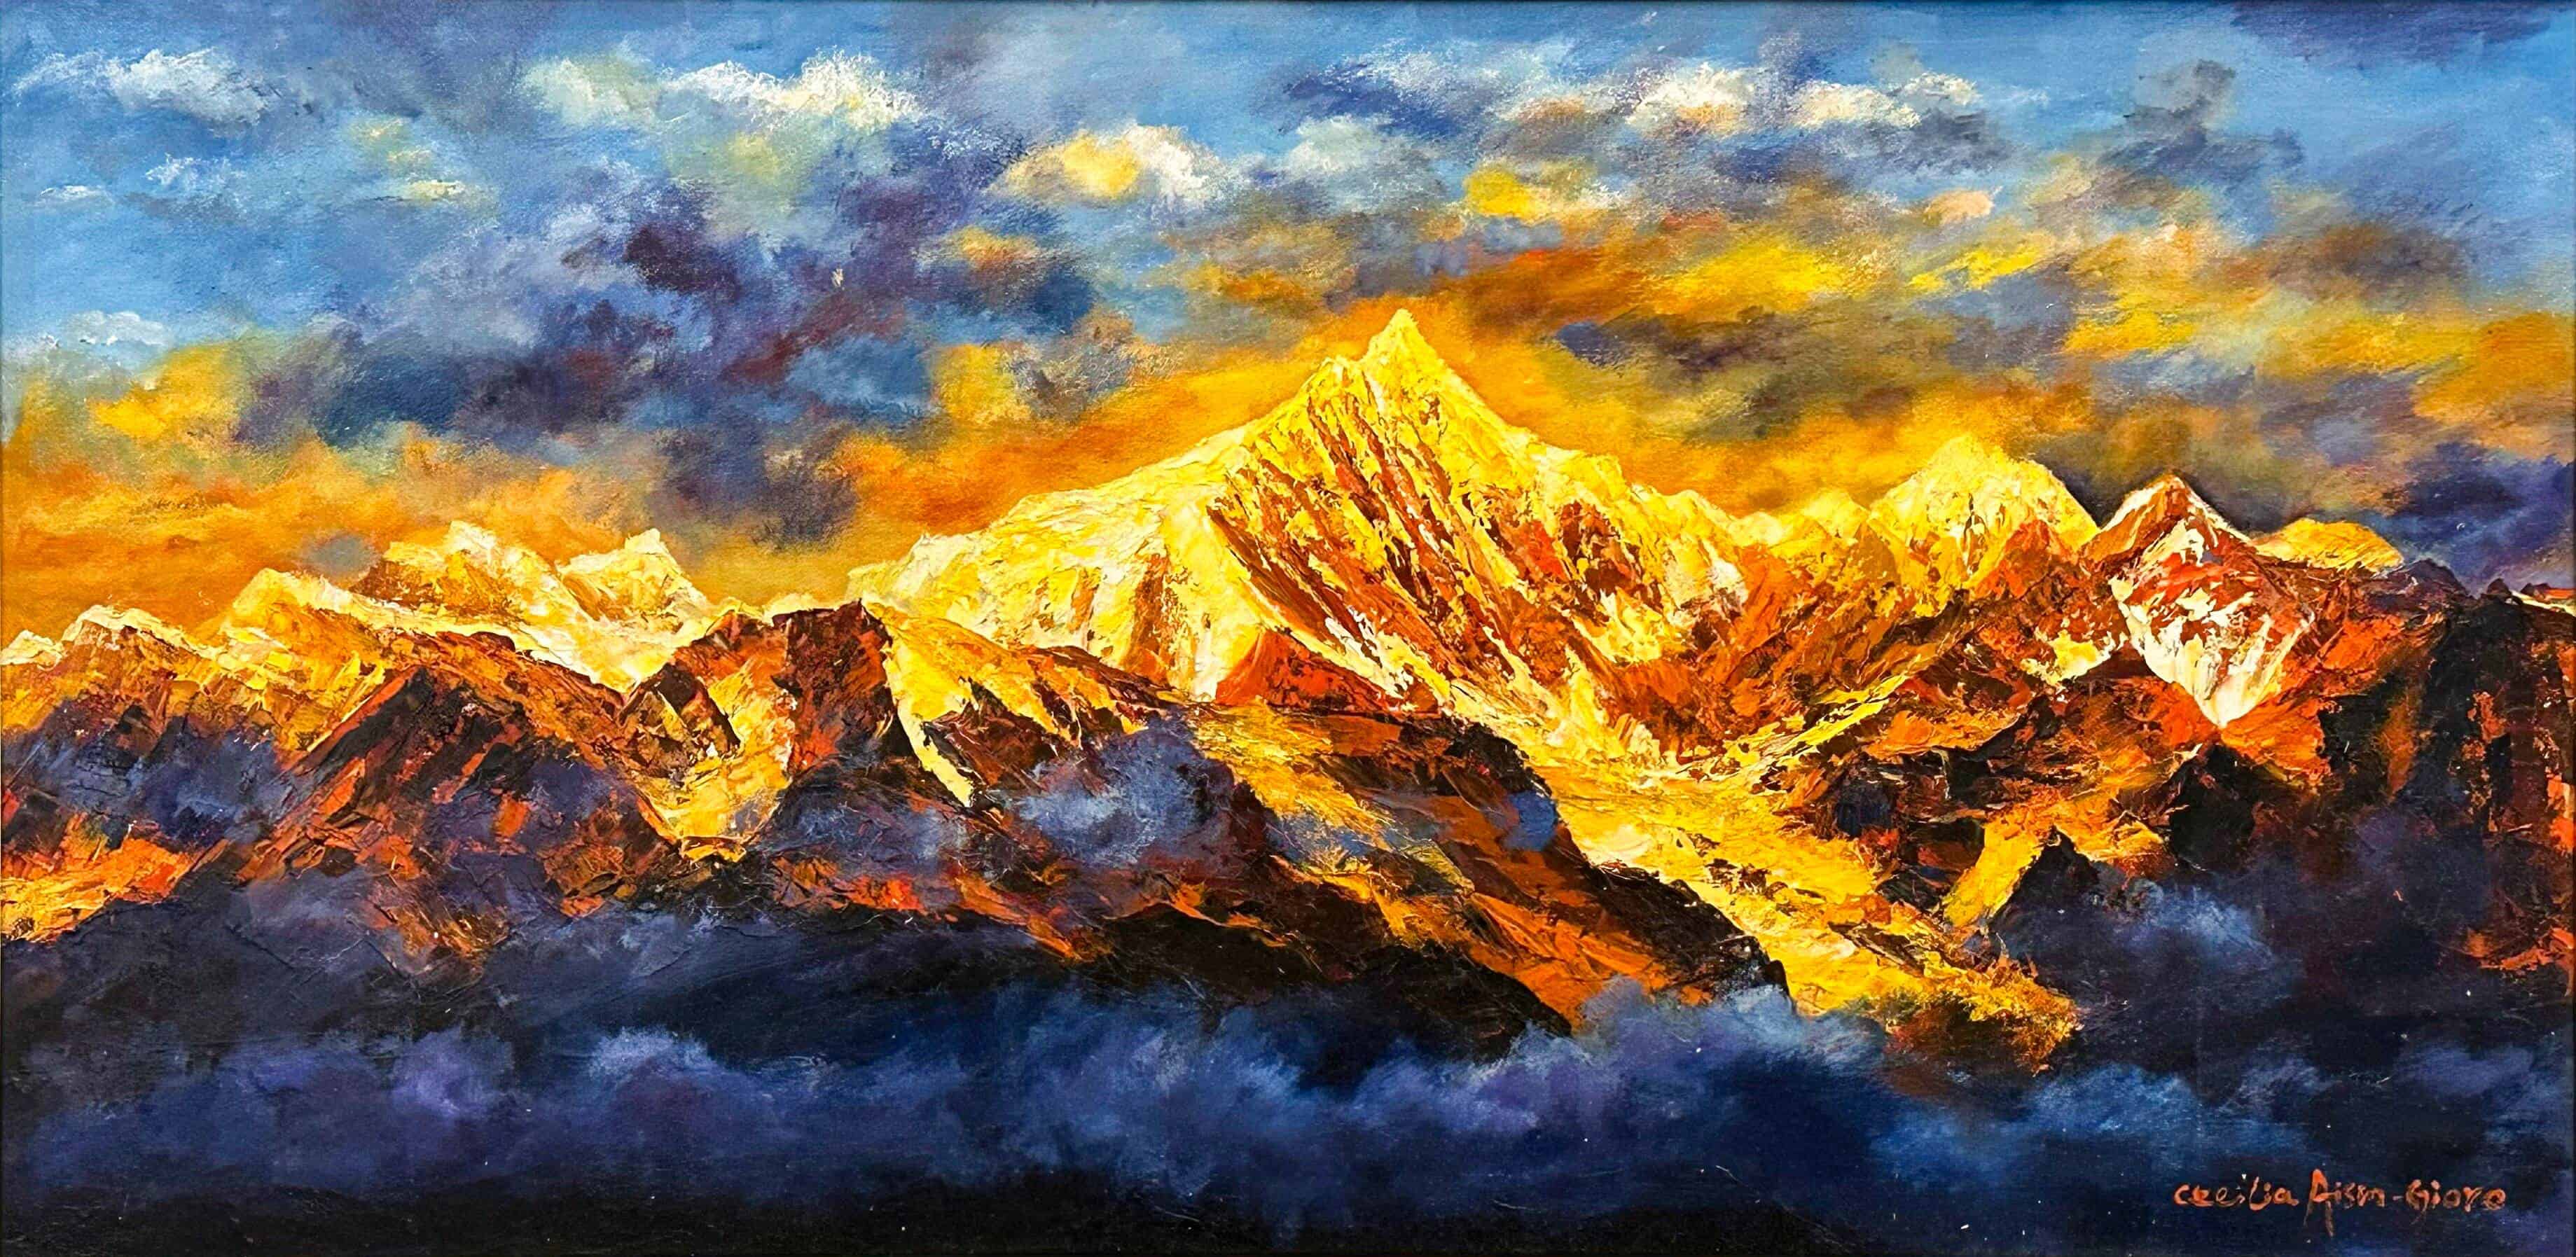 Contemporary Art. Title: Theory of the Mountains, Oil on Canvas, 23 x 47 in by Canadian Artist Cecilia Aisin-Gioro.